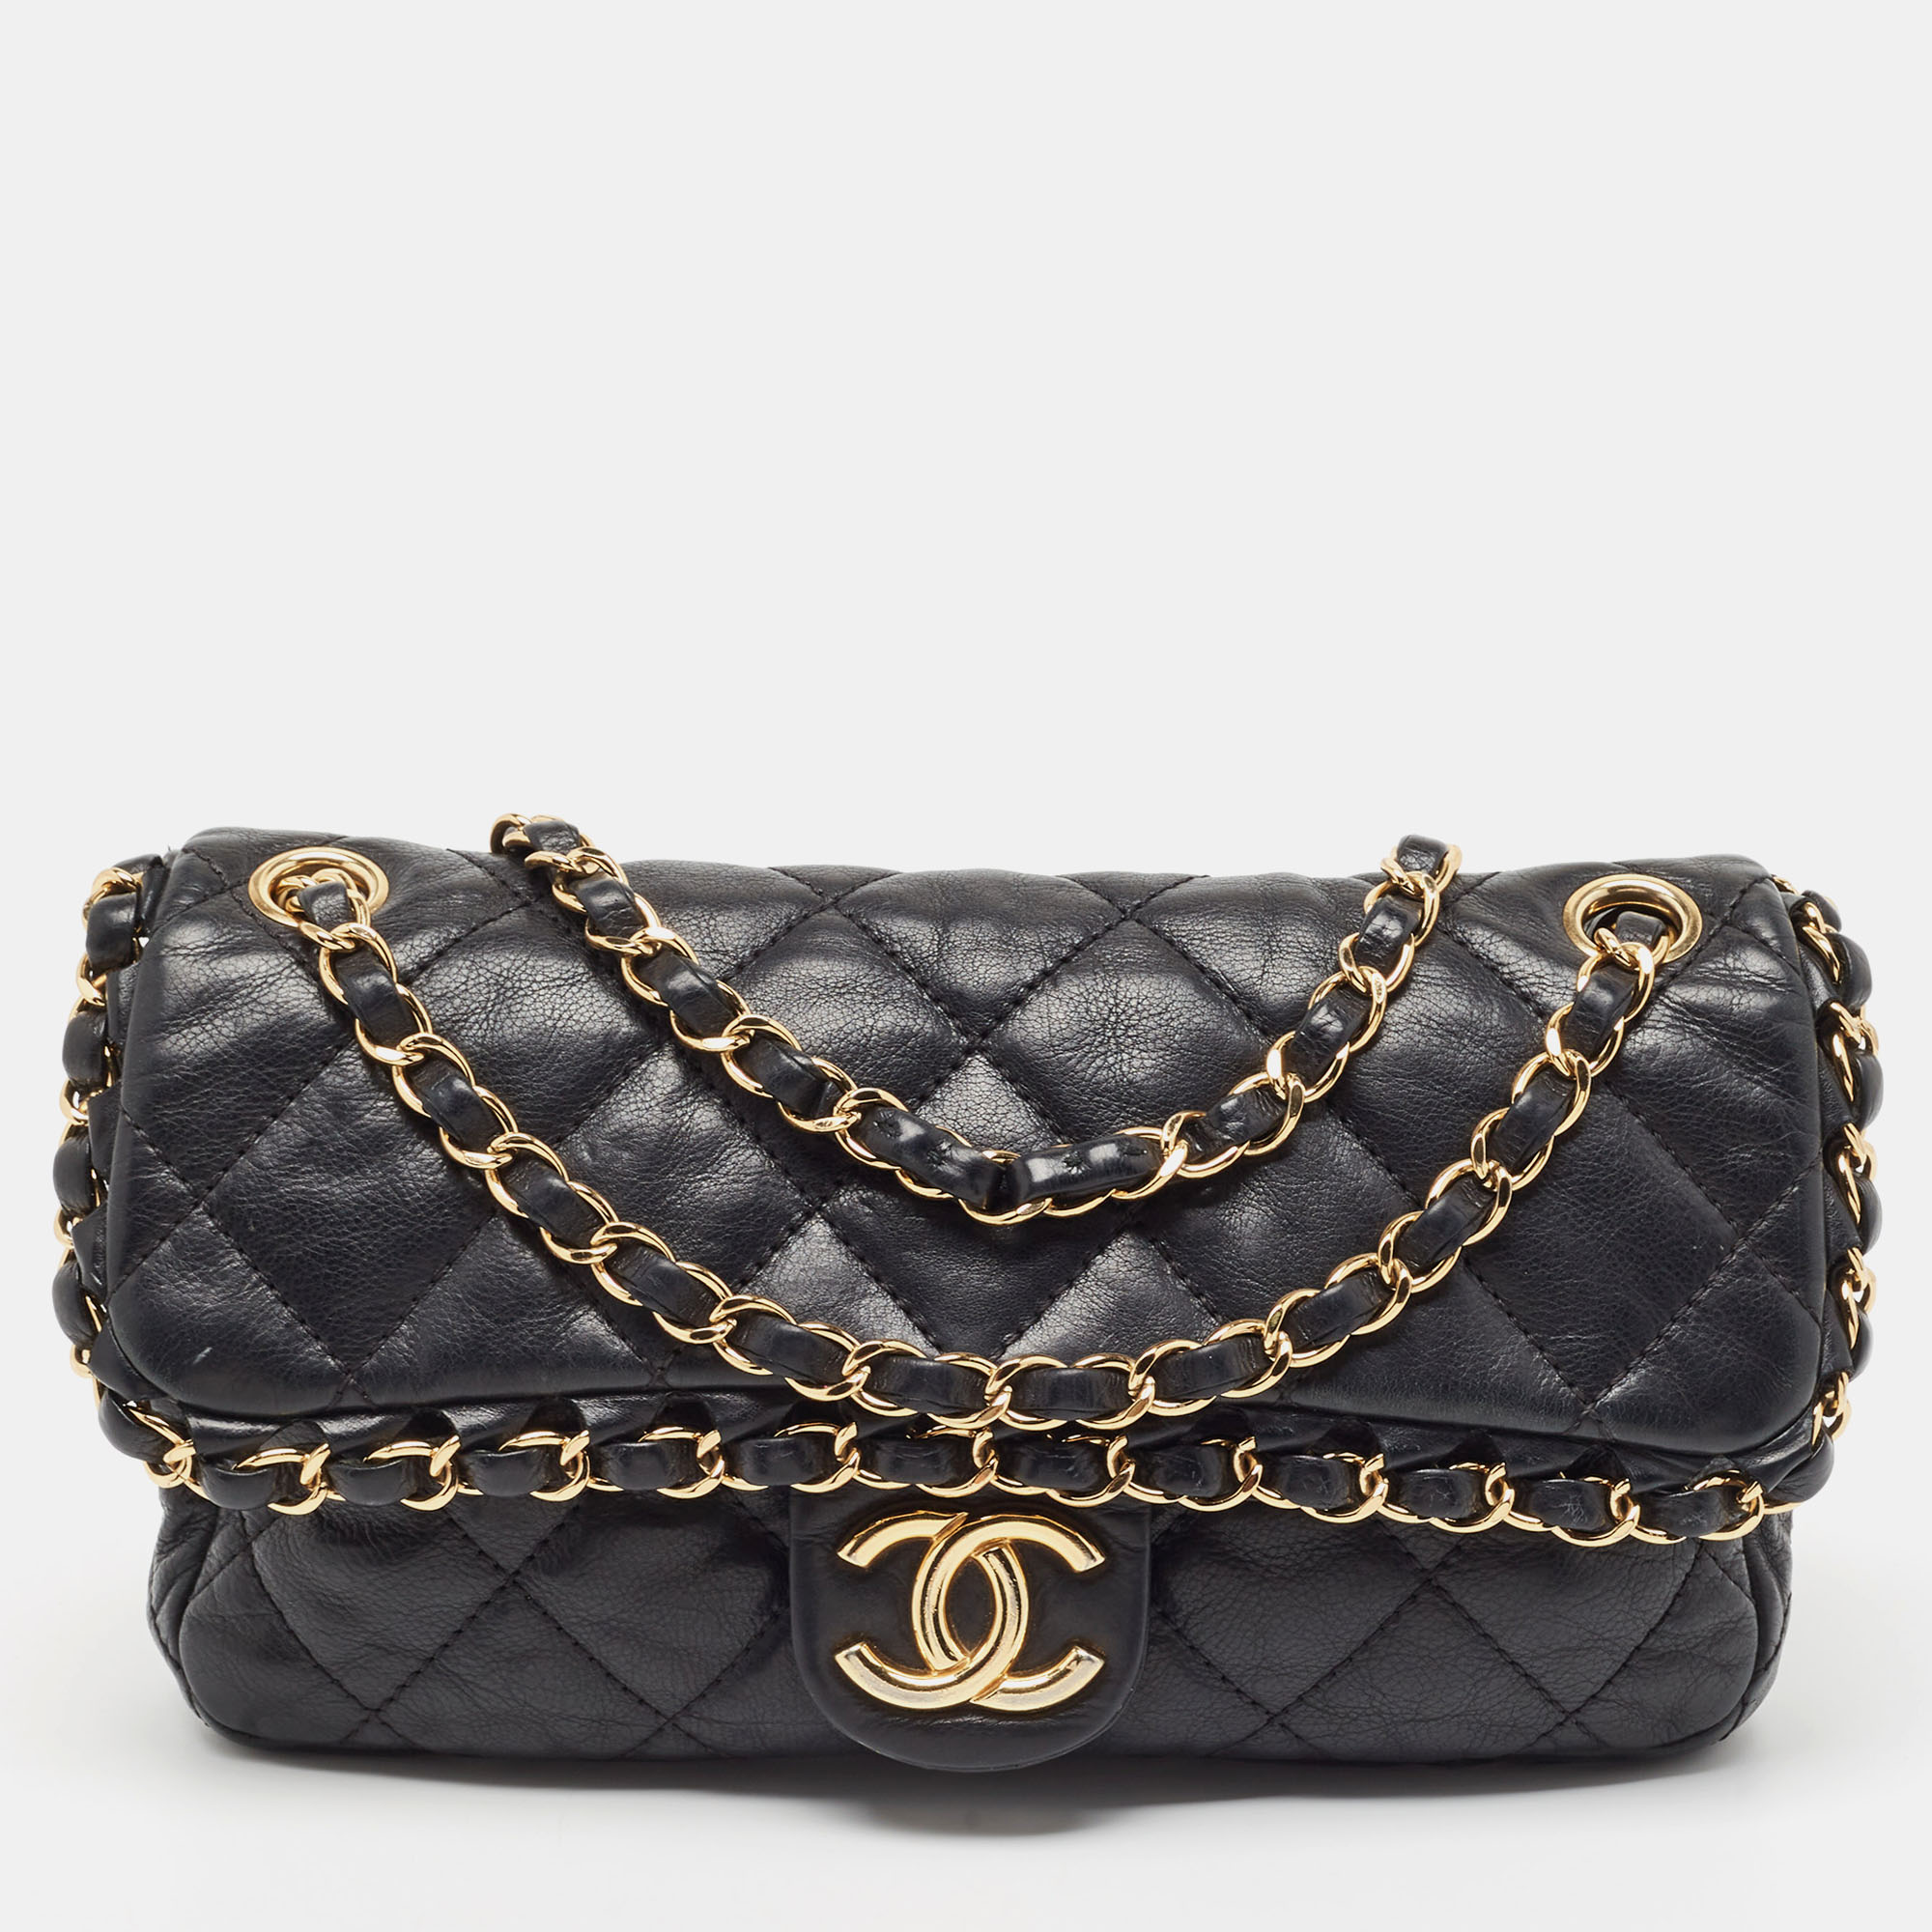 Pre-owned Chanel Black Quilted Leather Chain Me Flap Bag